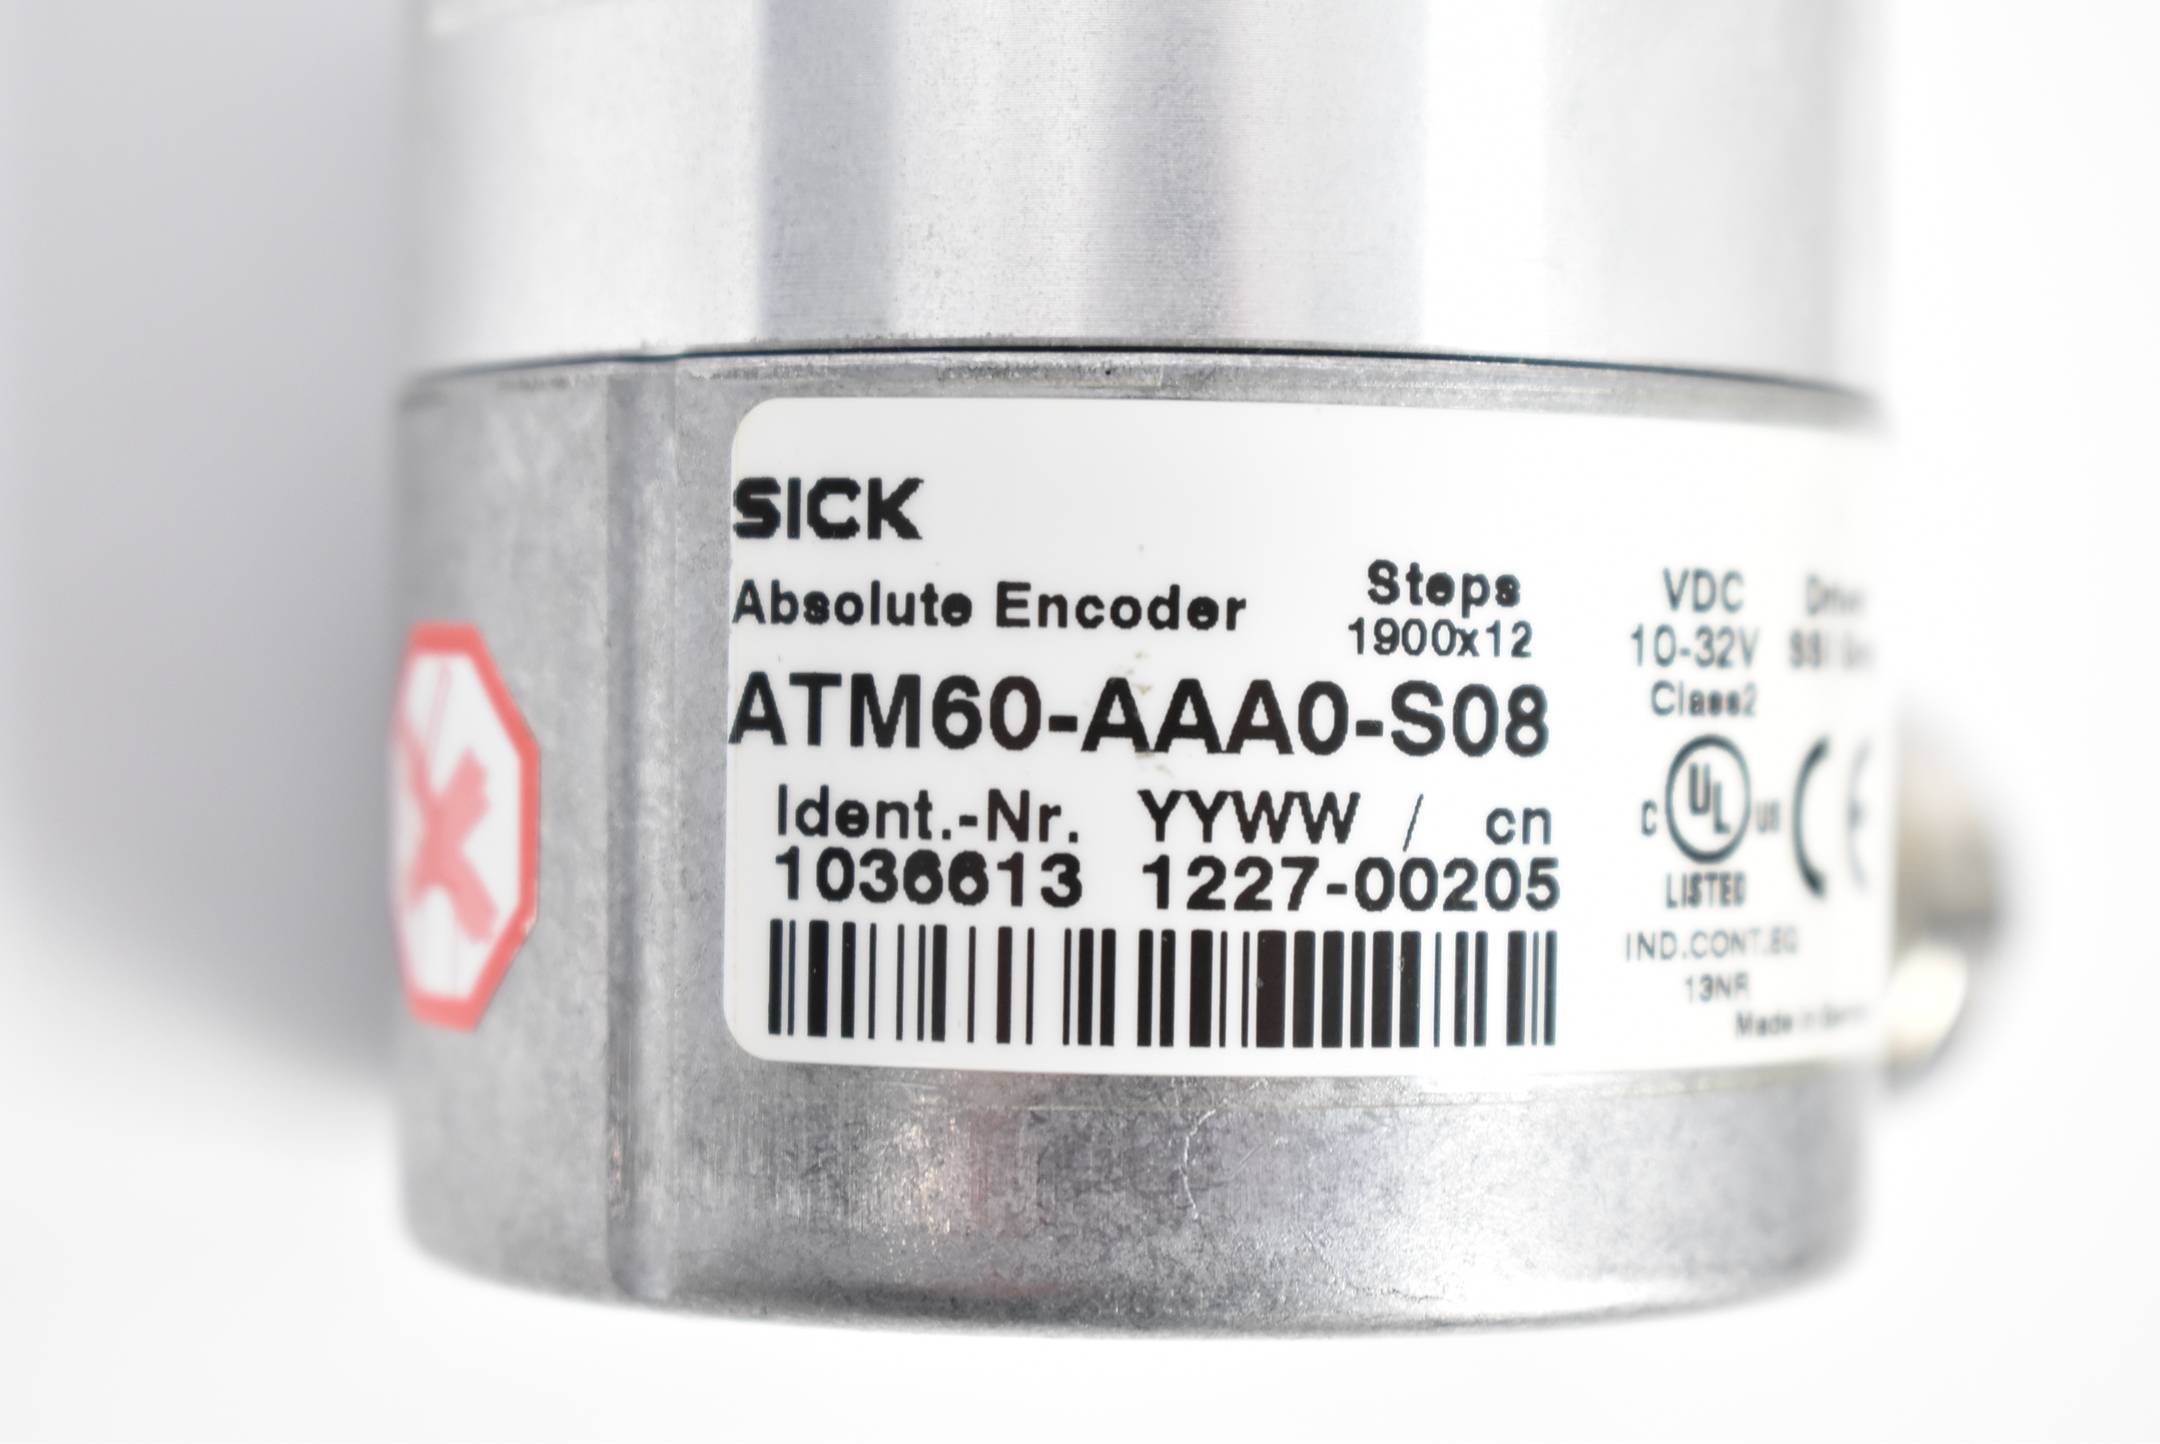 Sick Absolute Encoder ATM60-AAA0-S08 ( 1036613 )